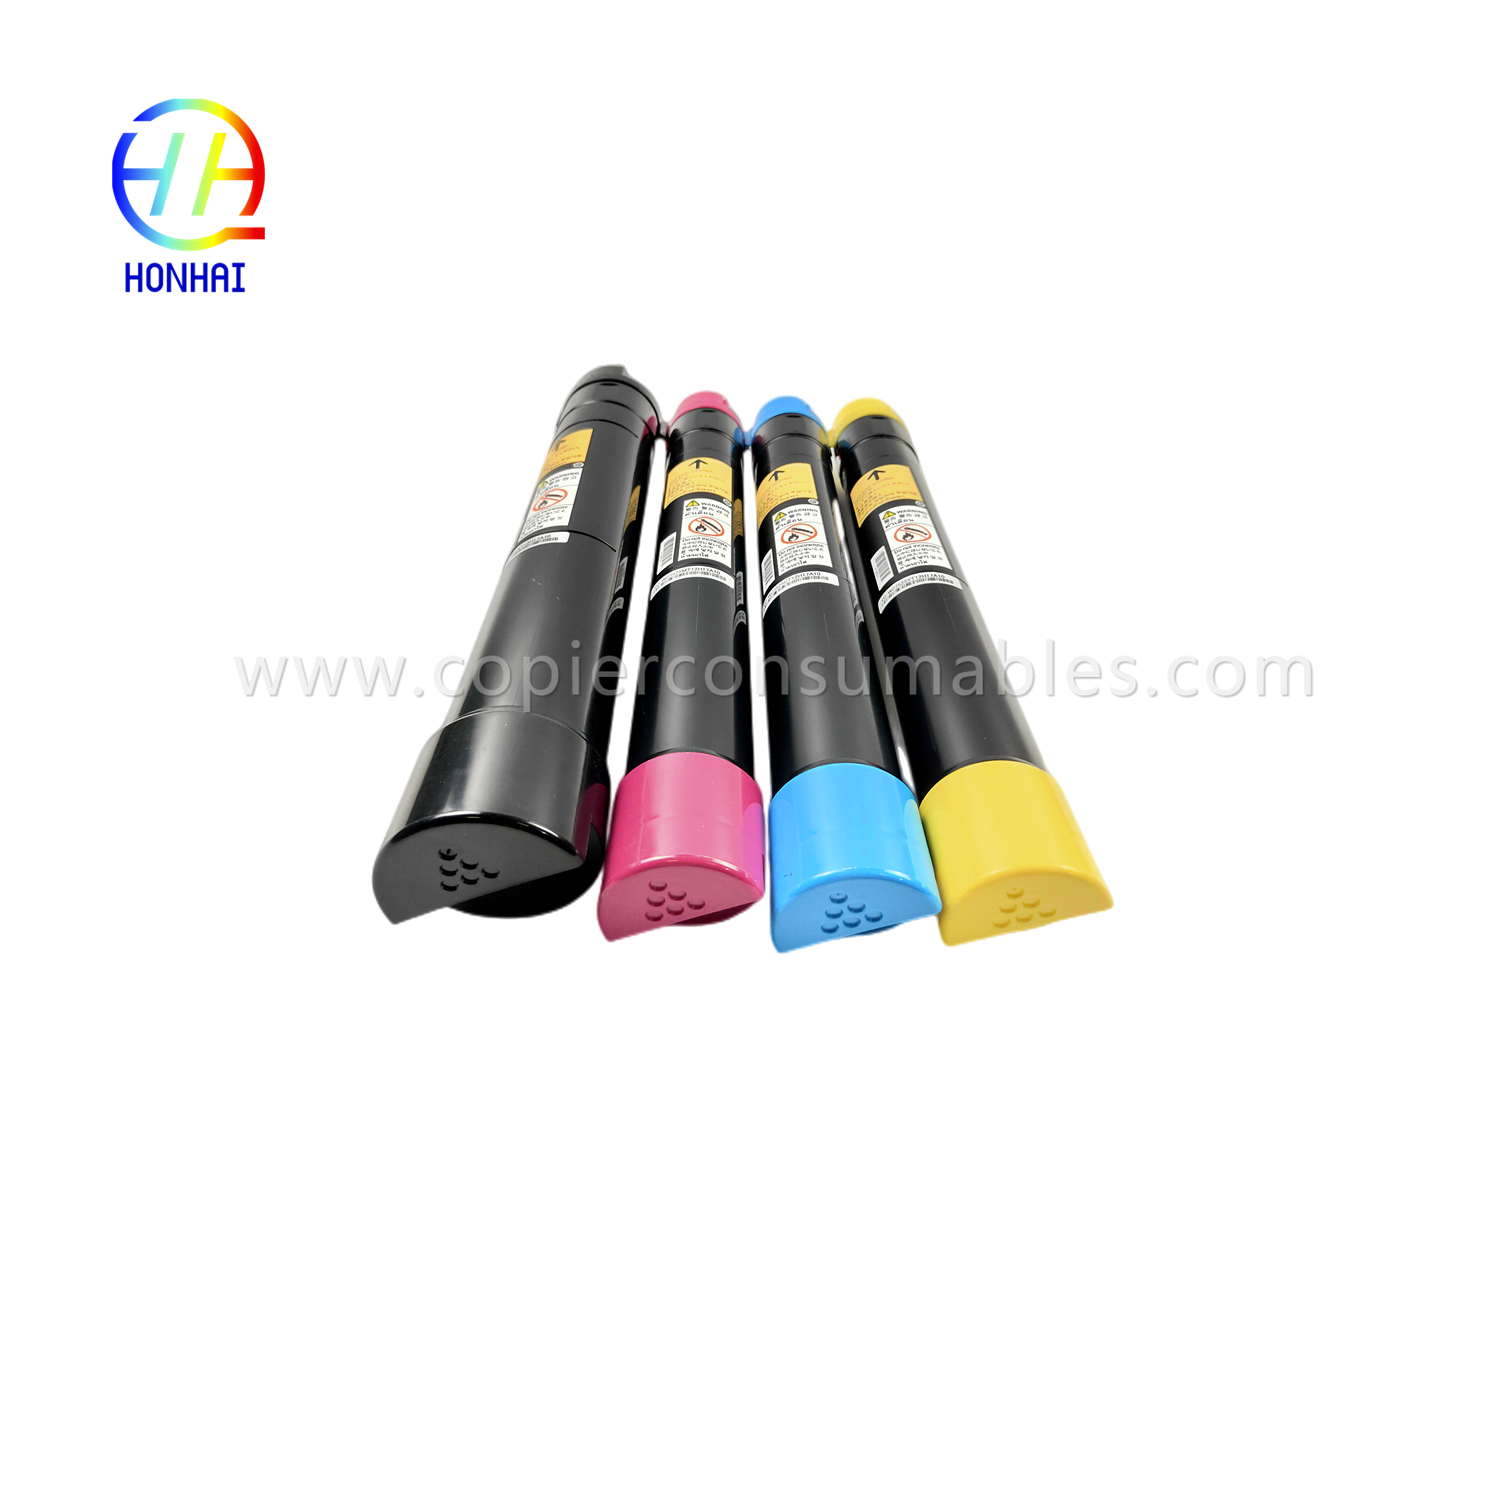 https://www.copierconsumables.com/toner-cartridge-imported-powder-set-bcmy-for-xerox-workcentre-7830-7835-7845-7855-7970-7525-7530-7535-7545-7556-0136 006r01514-006r01515-006r01516-product/